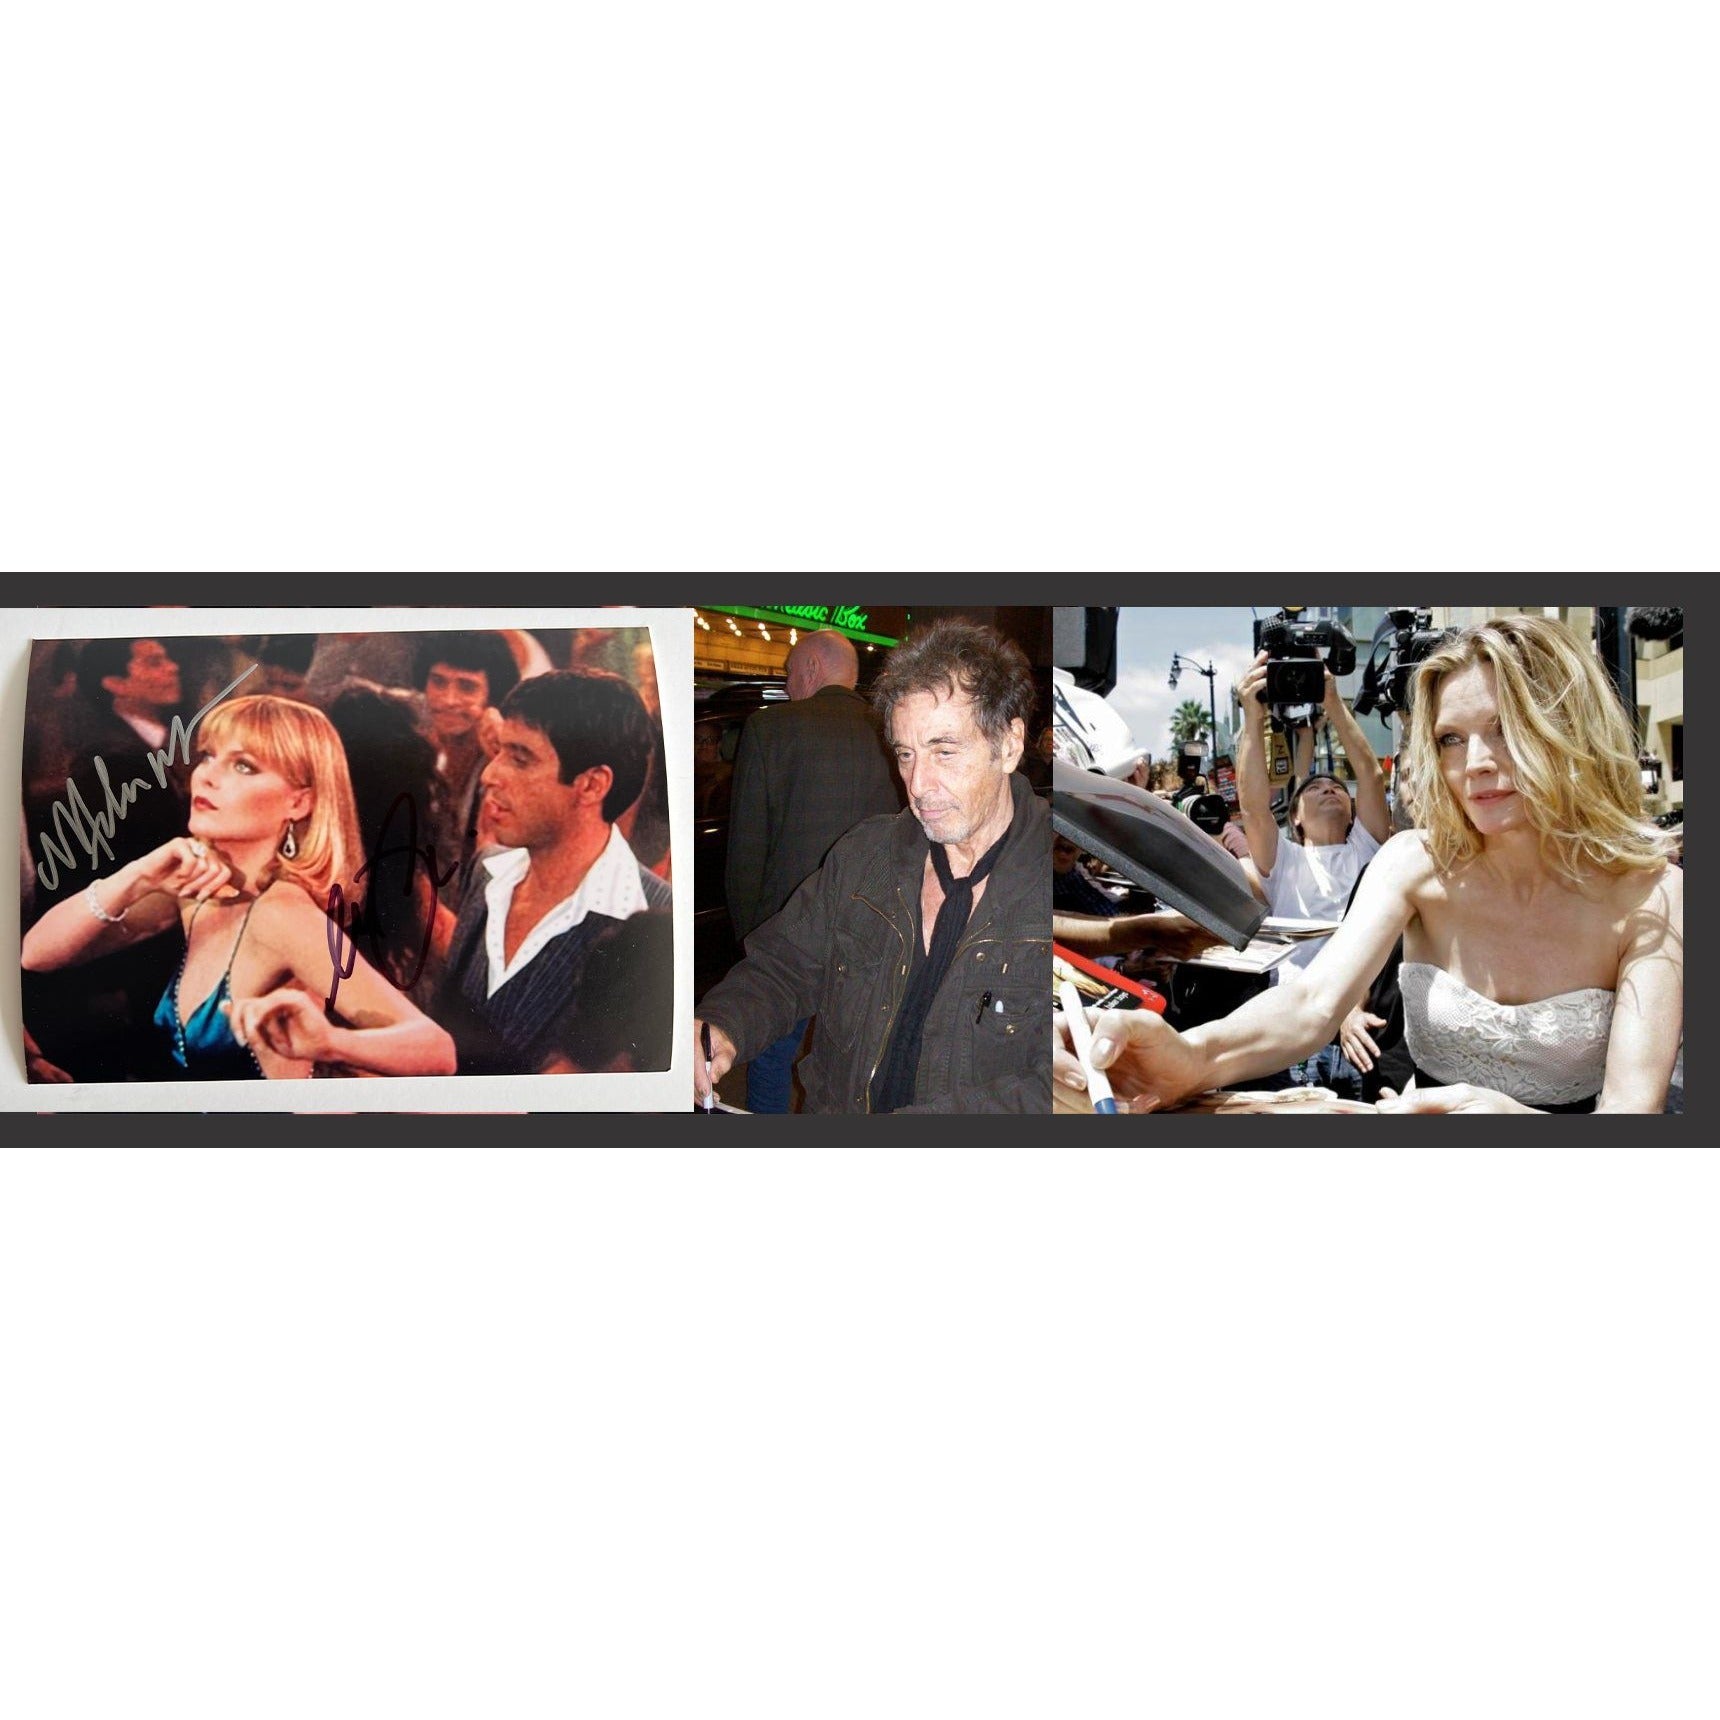 Al Pacino Tony Montana Scarface & Michelle Pfieffer 5x7 photo signed with proof